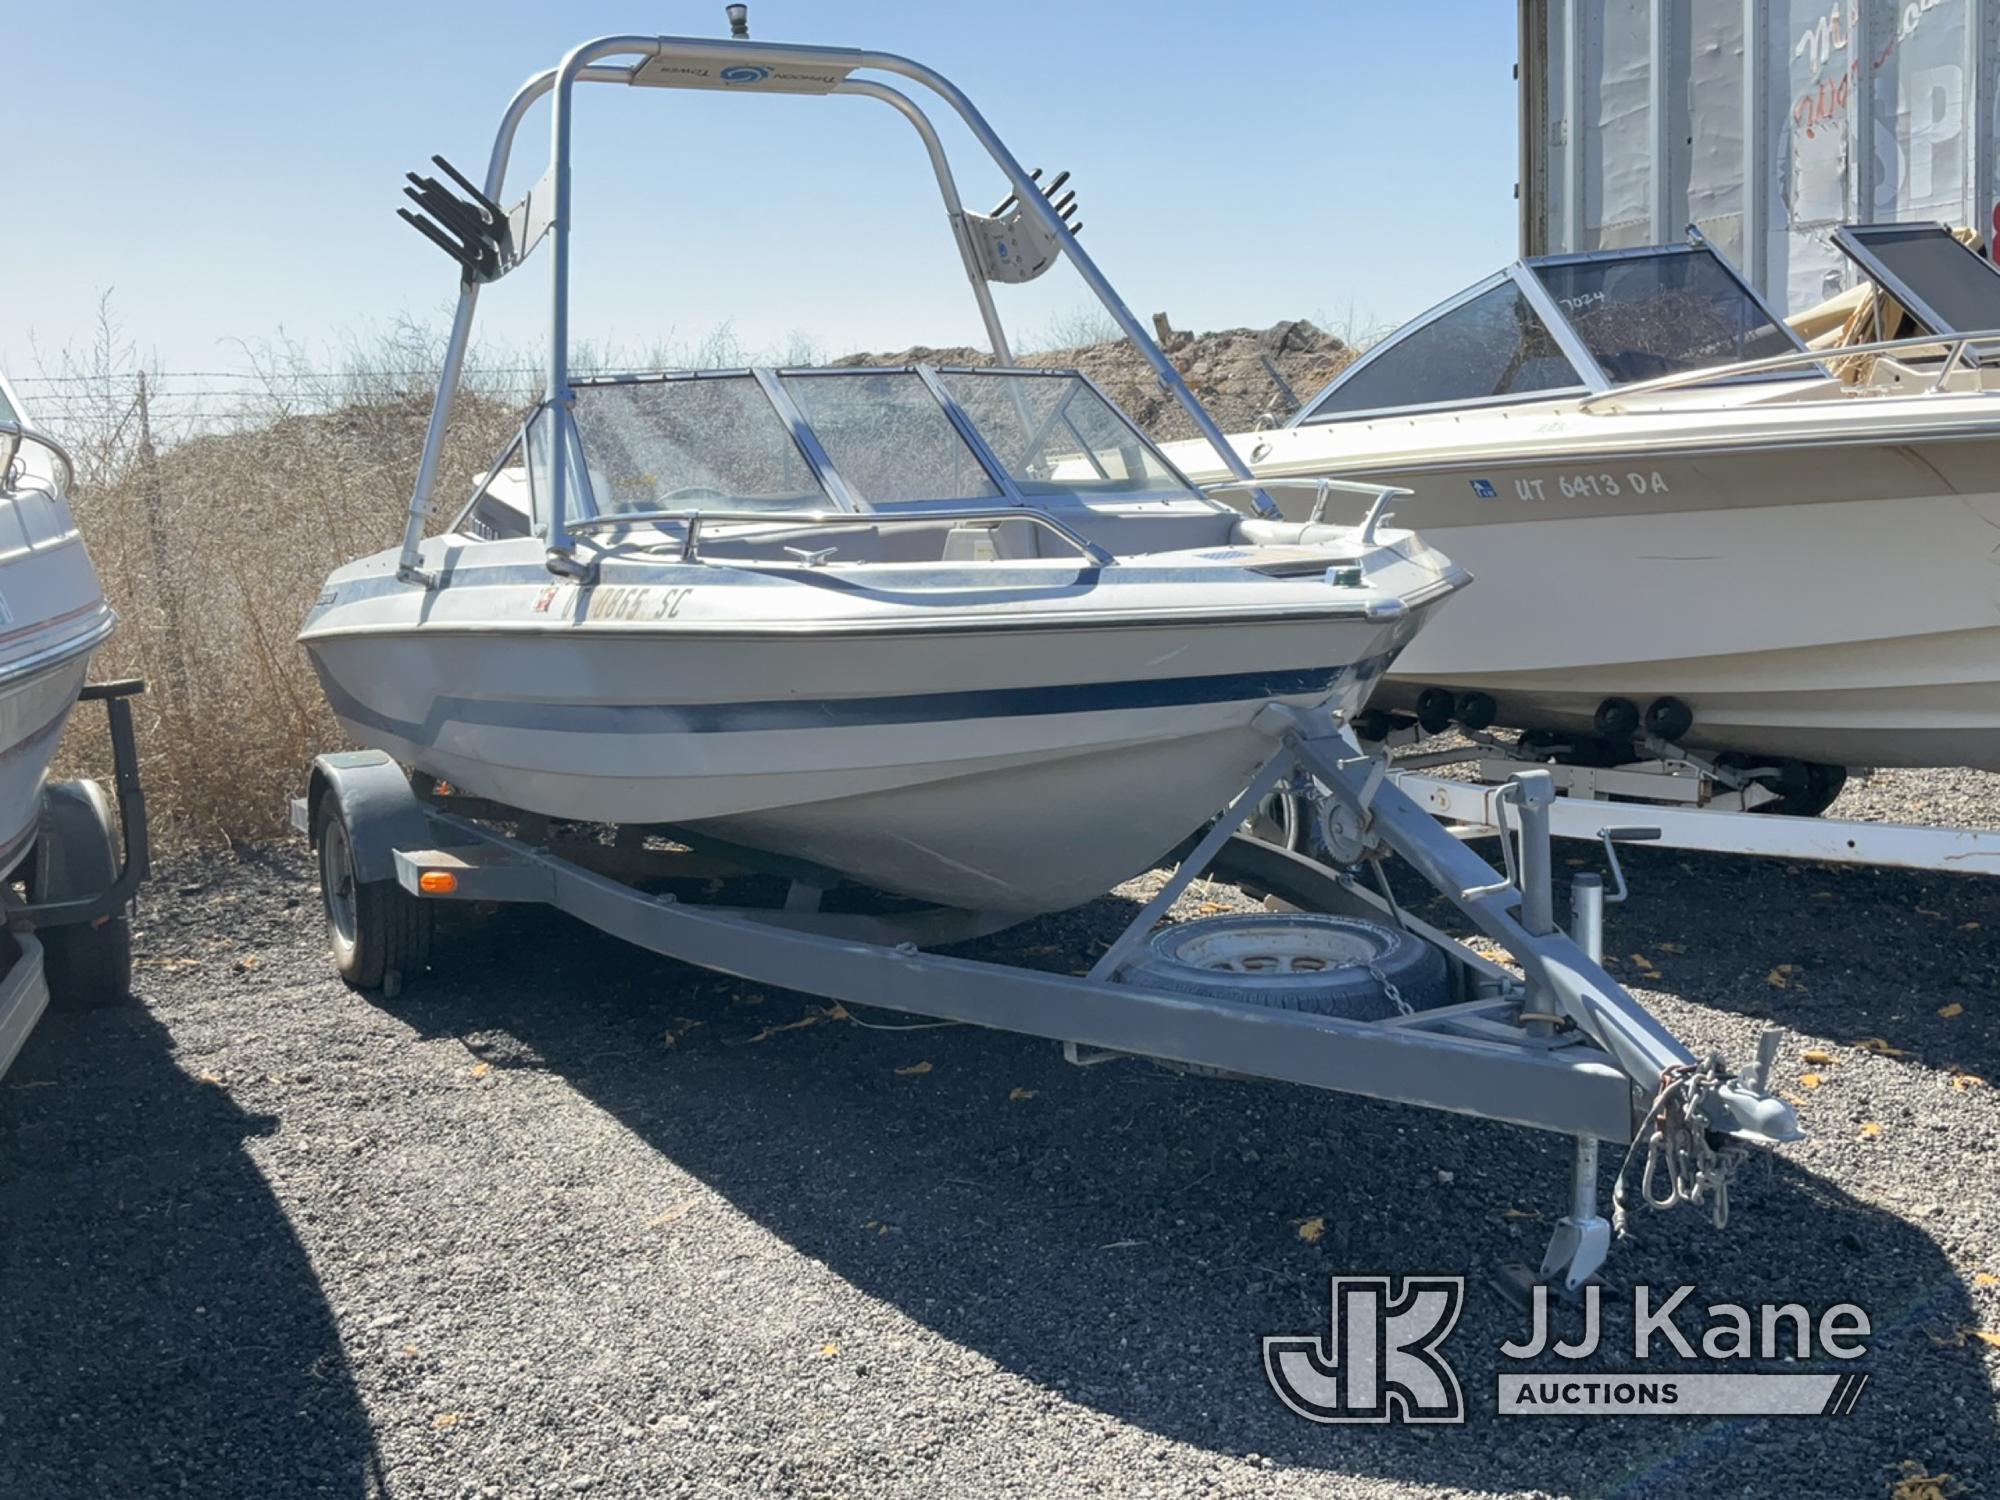 (Salt Lake City, UT) 1984 Glastron 17ft Boat Donation - Condition Unknown